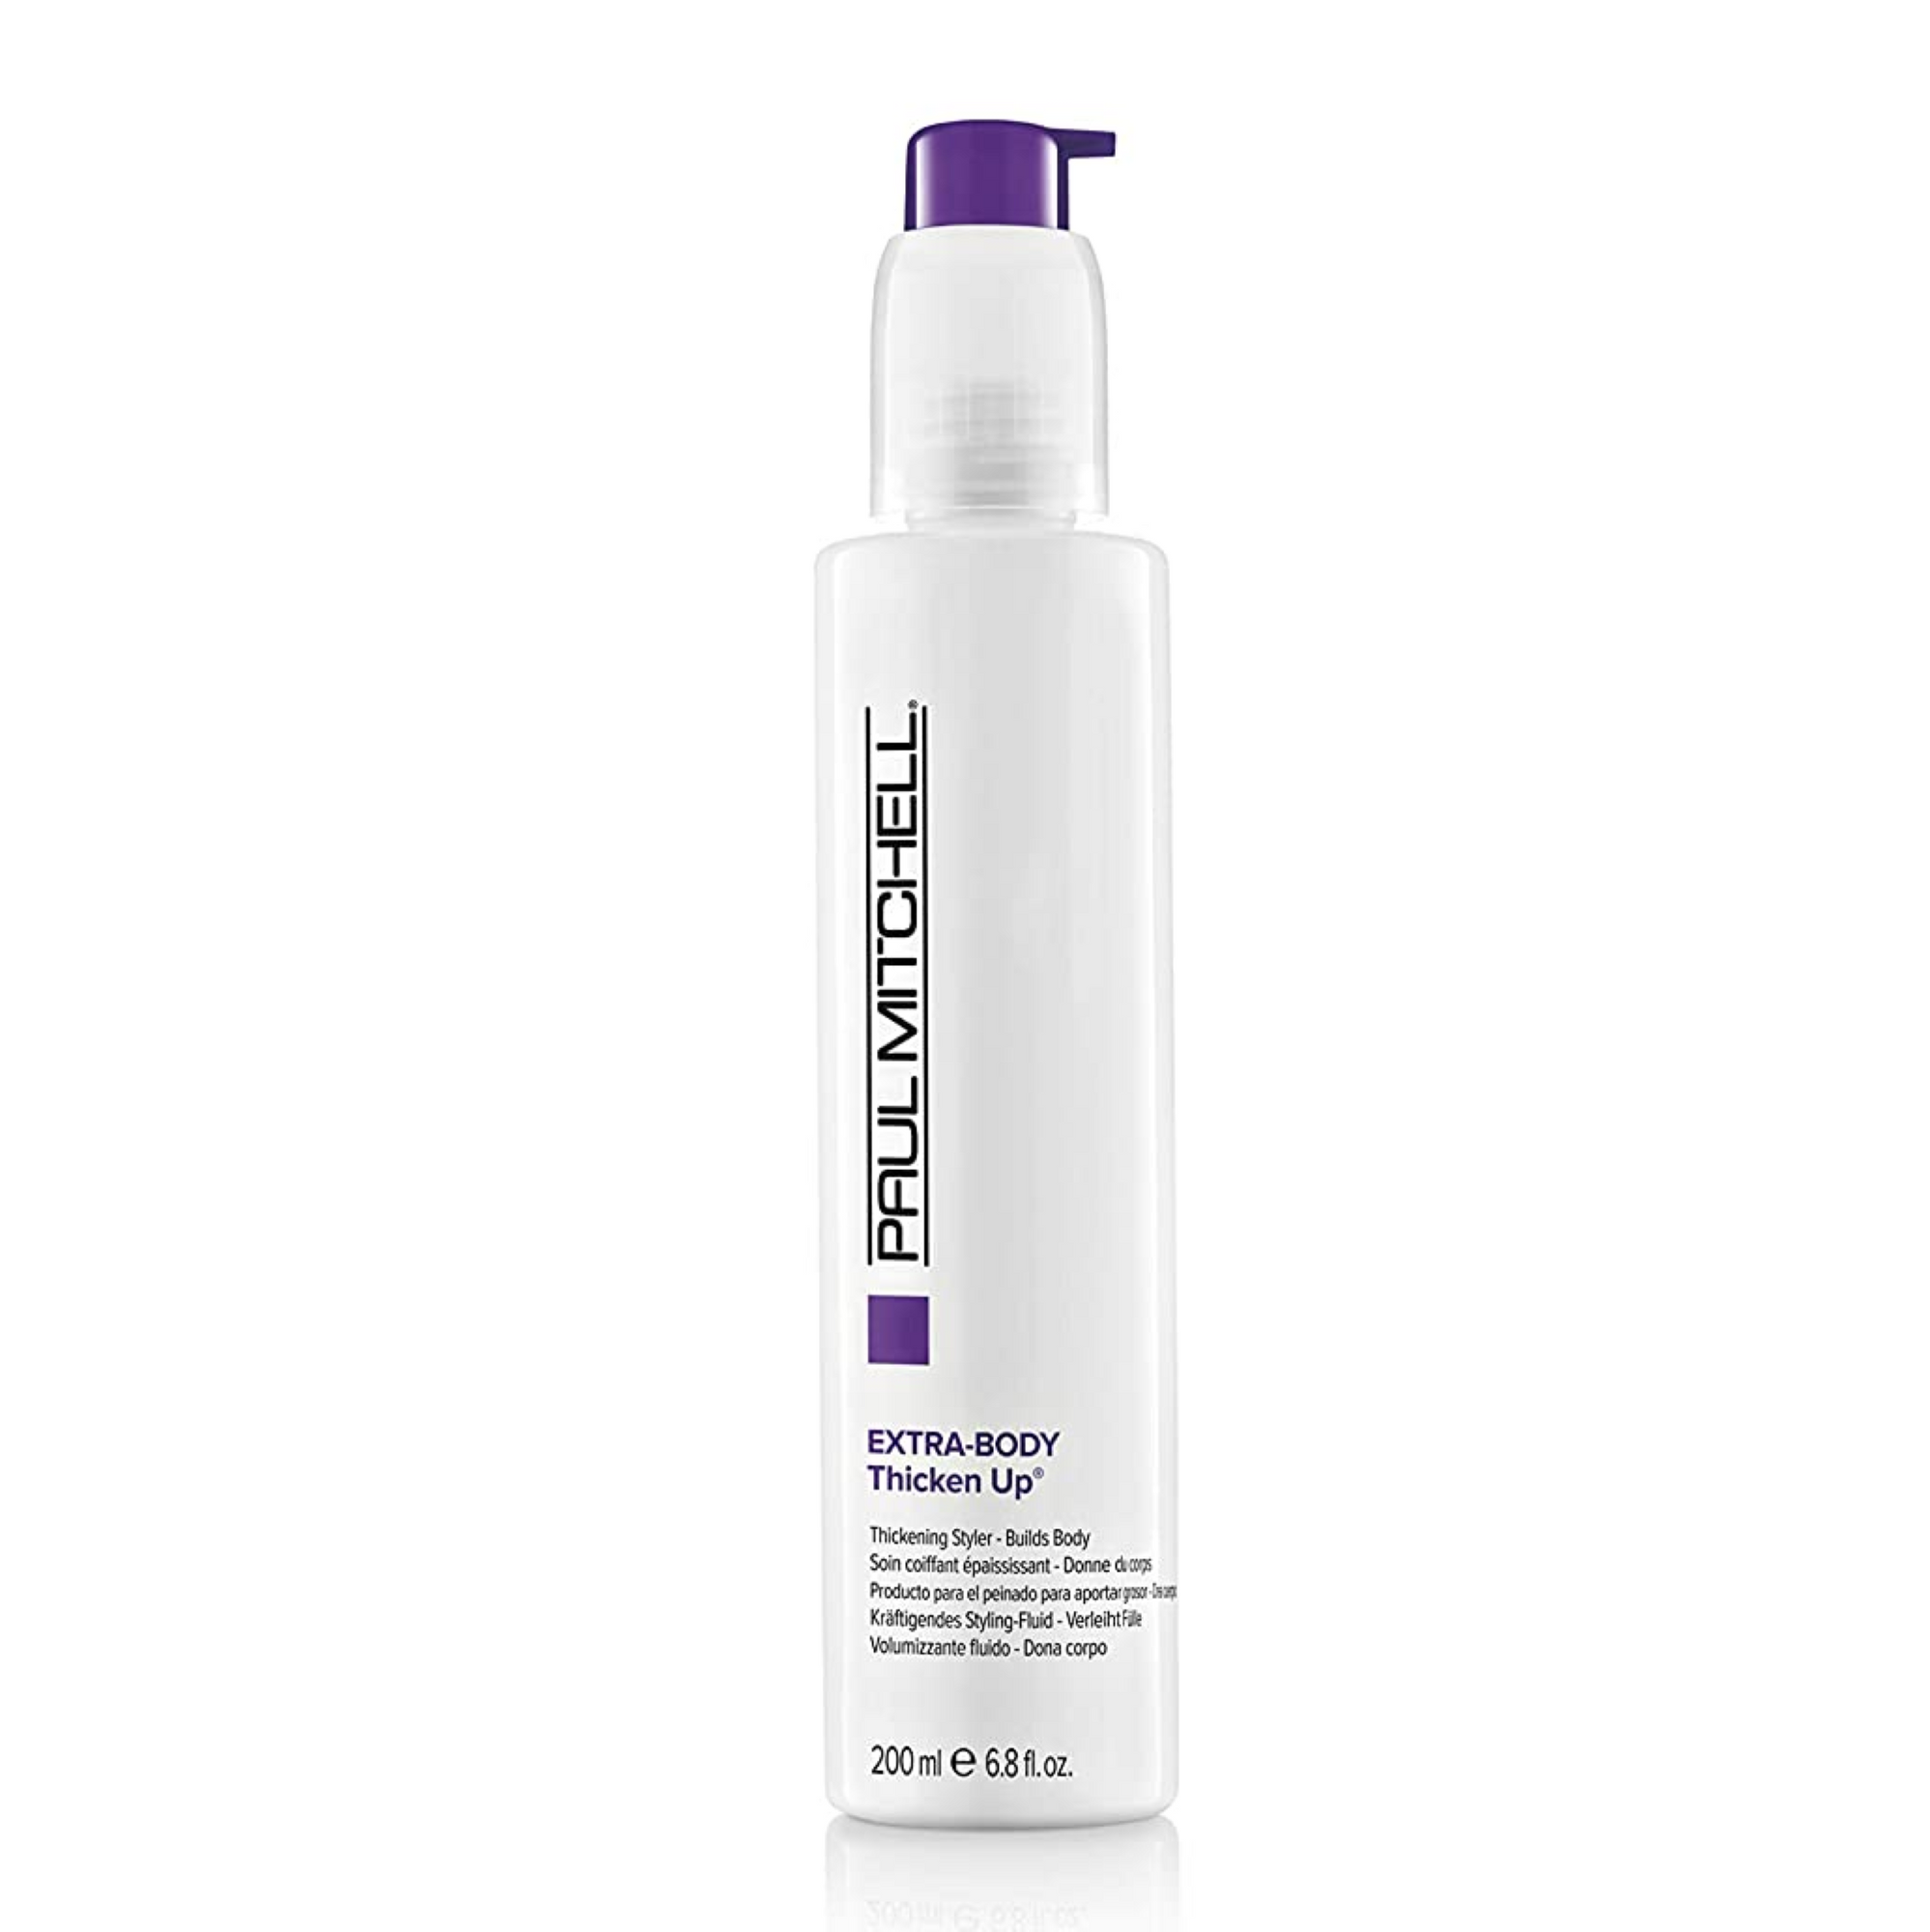 Paul Mitchell Extra-Body Thicken Up Styling Liquid / 6.8